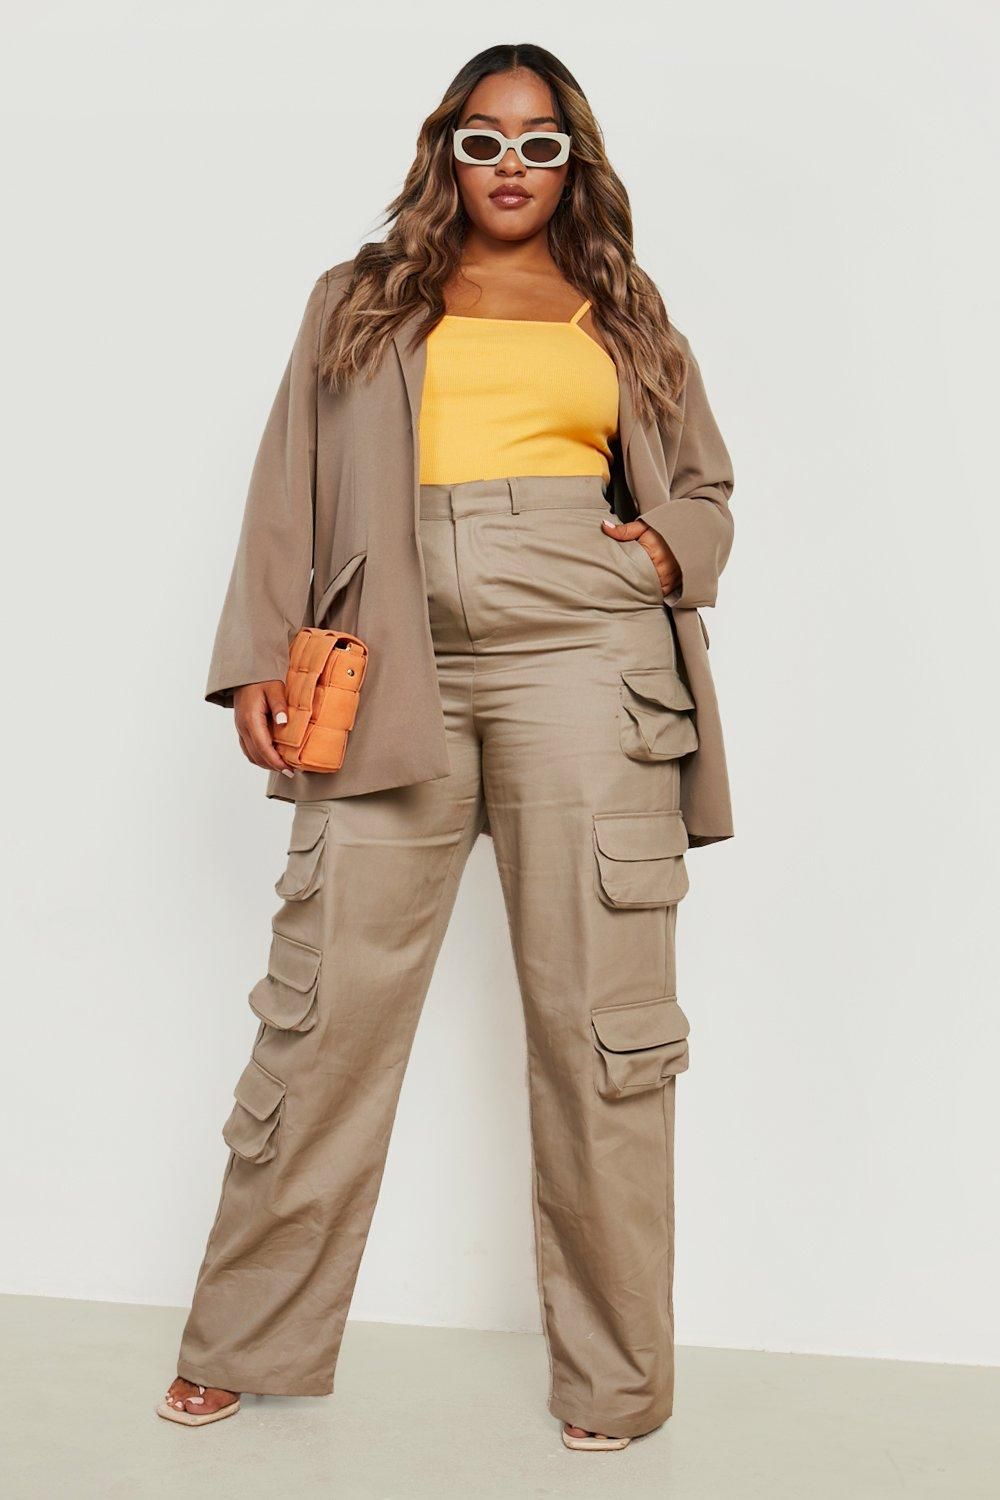 cargo pants outfit ideas for plus size girls｜TikTok Search